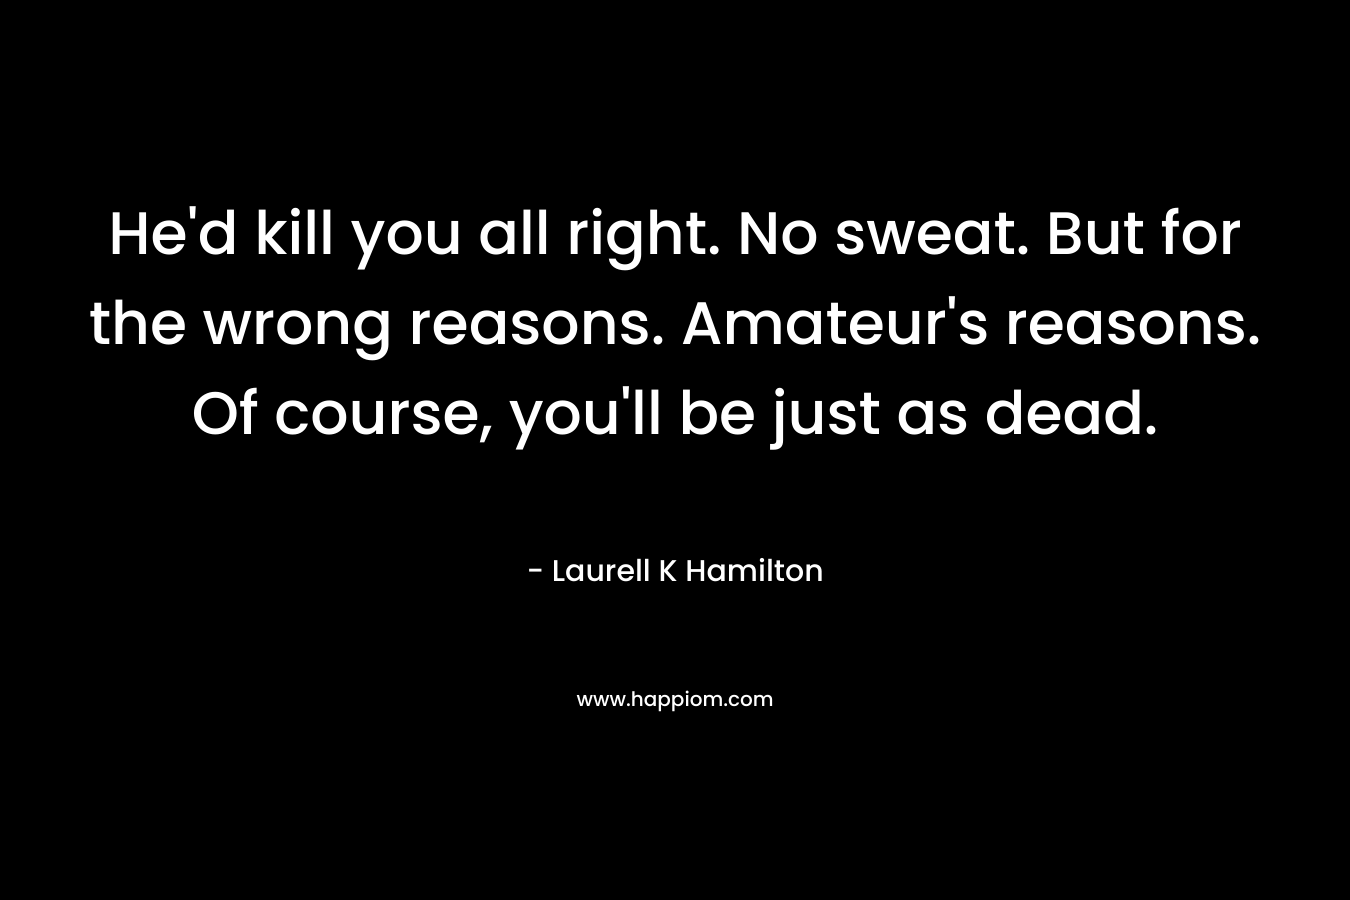 He’d kill you all right. No sweat. But for the wrong reasons. Amateur’s reasons. Of course, you’ll be just as dead. – Laurell K Hamilton